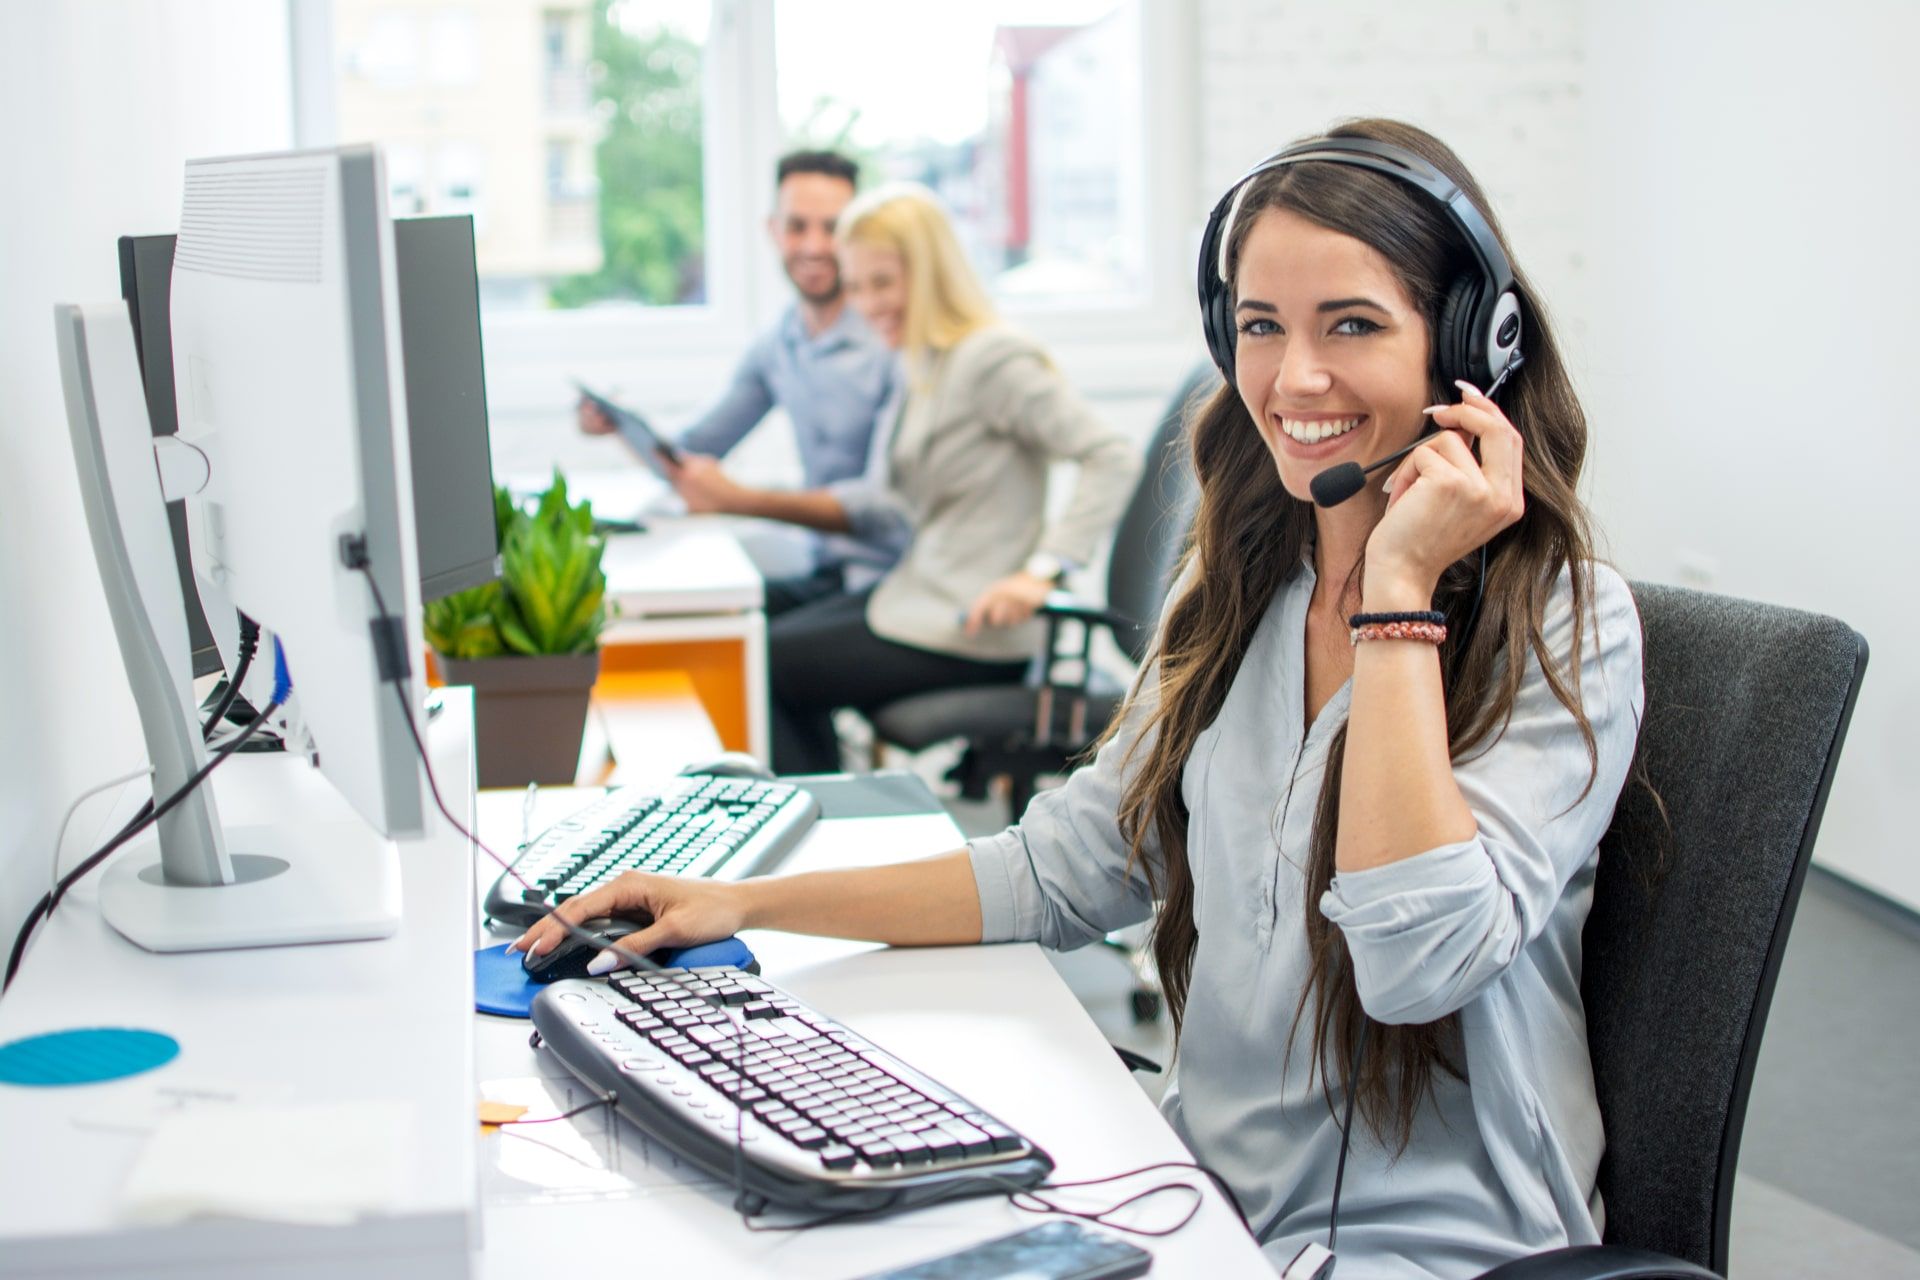 Smiling friendly female call-center agent with headset